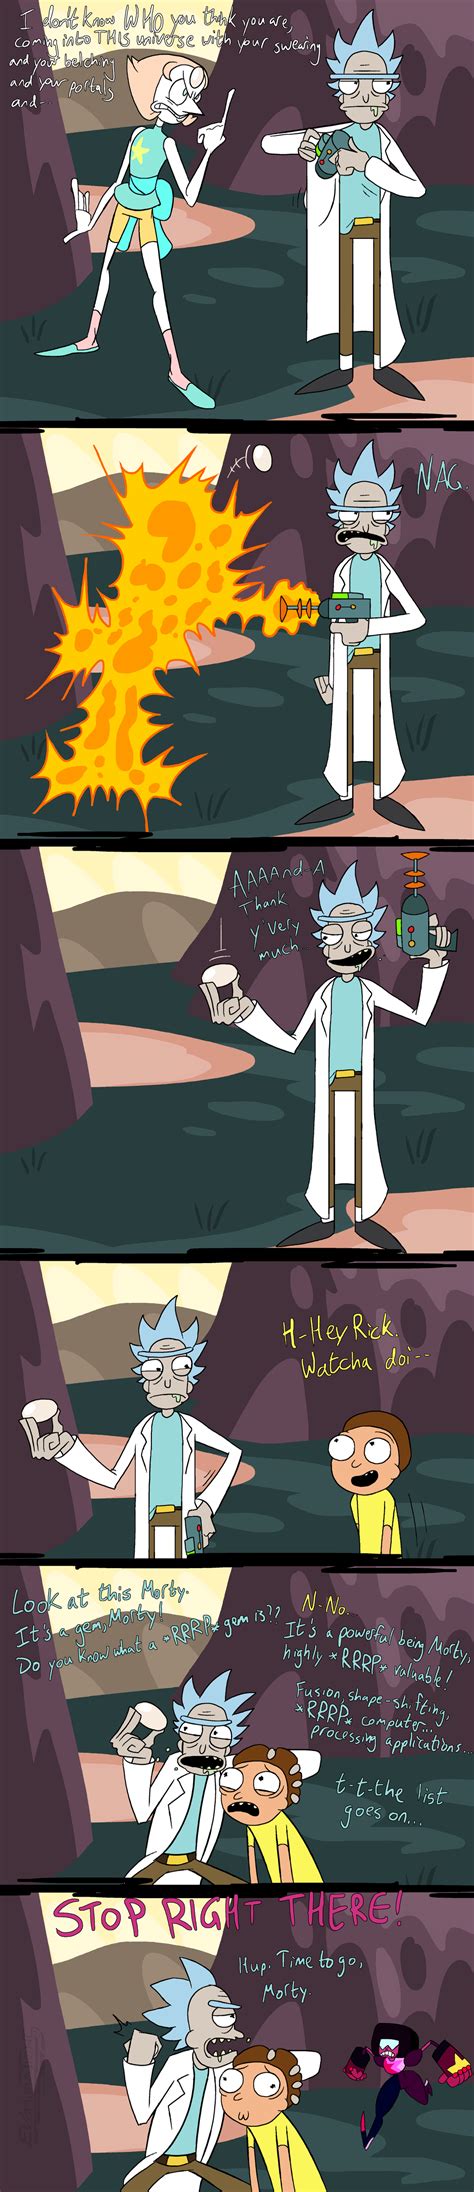 Rick And Morty Steven Universe Crossover By Evanimations On